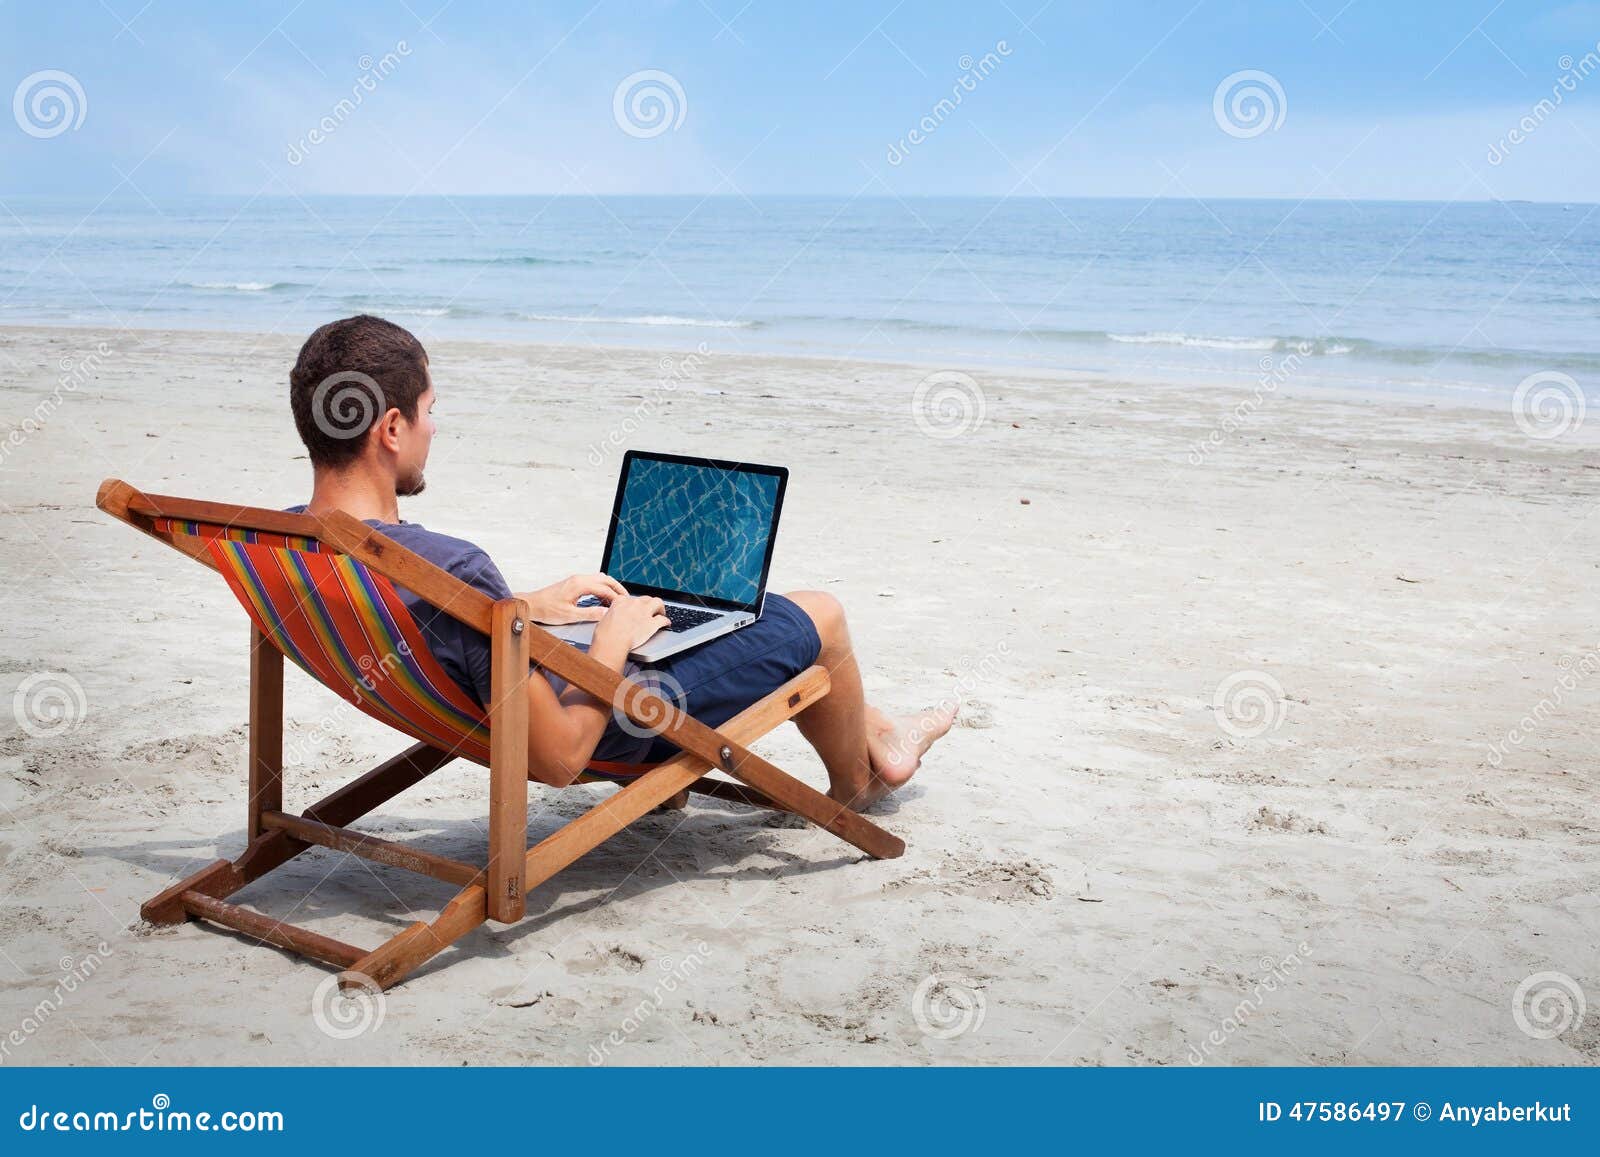 Banking online stock image. Image of internet, booking - 47586497